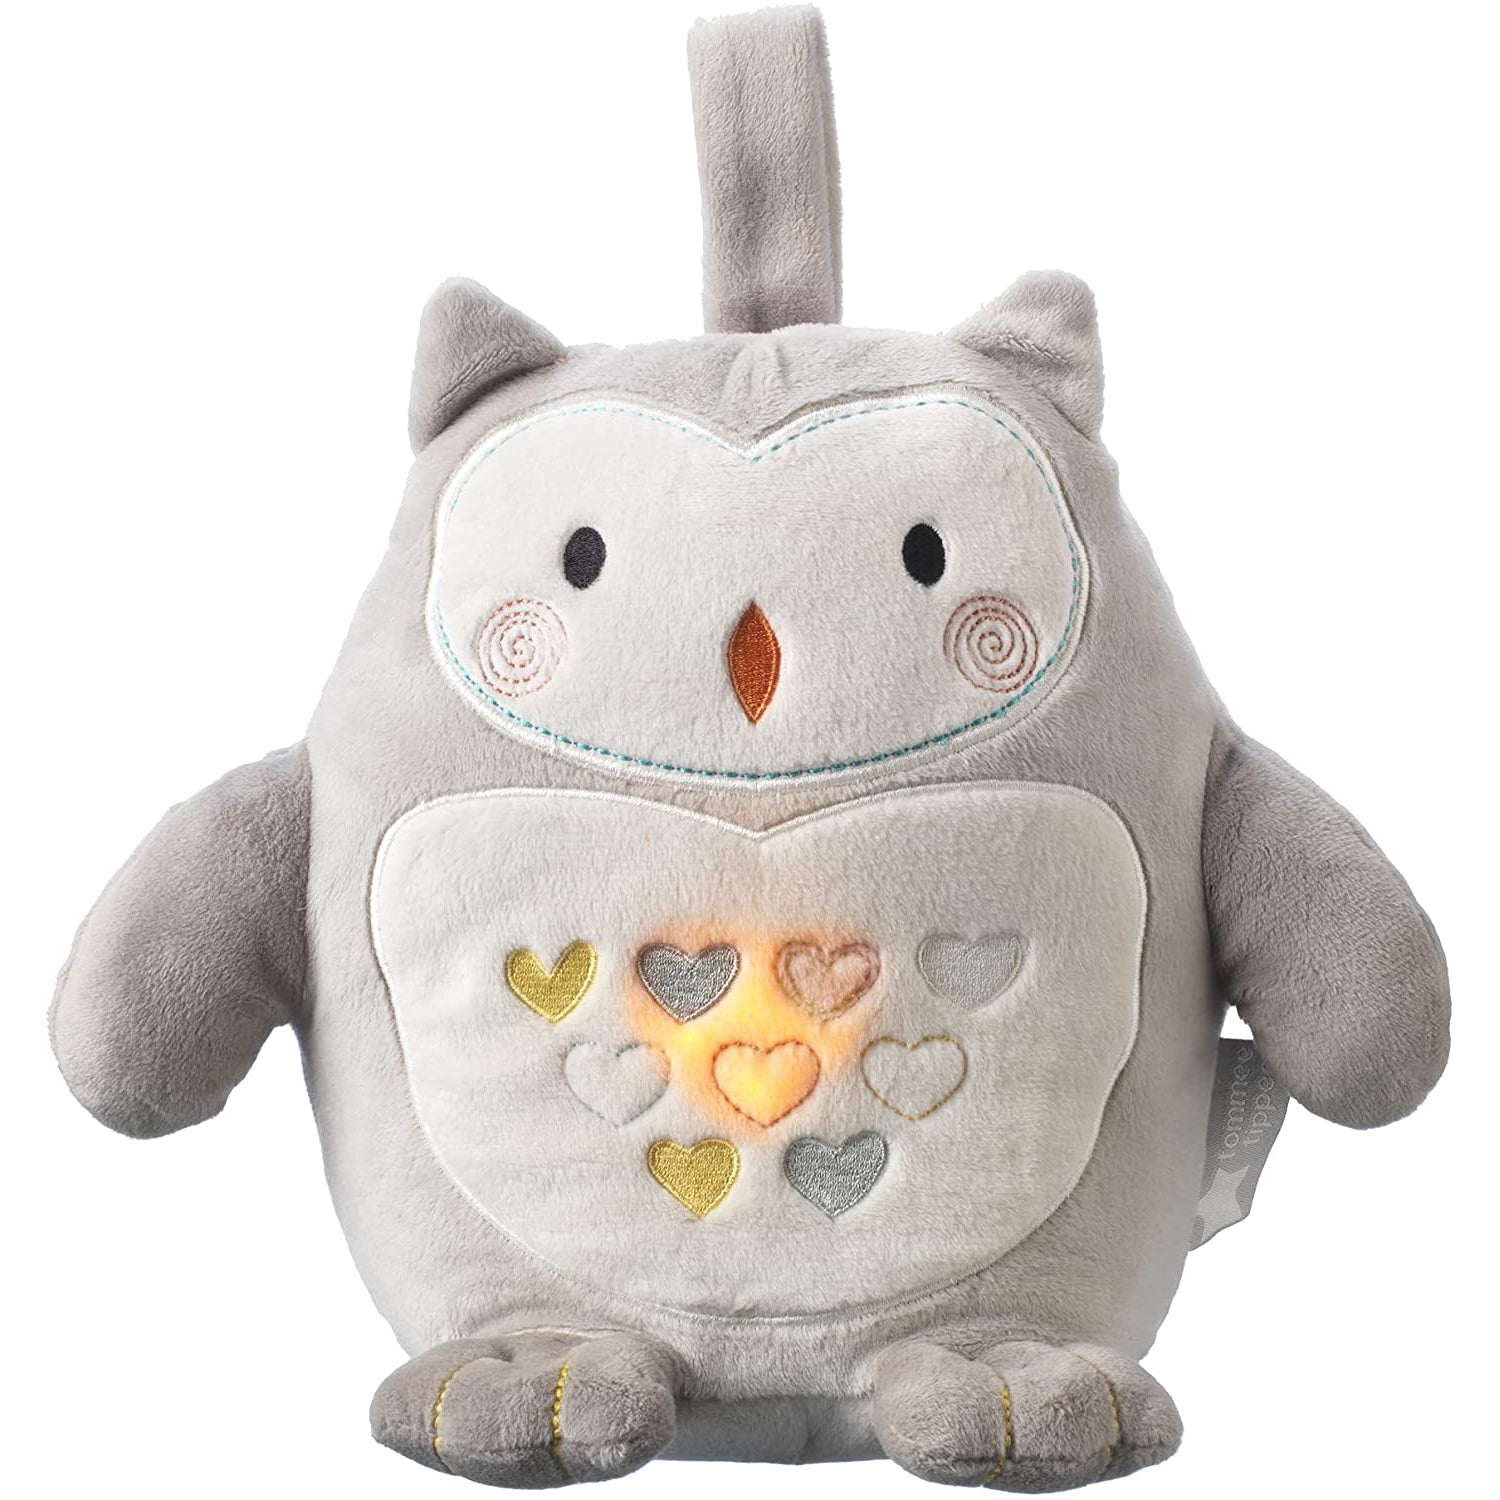 Tommee Tippee Ollie the Owl Grofriends Rechargeable Light and Sound Sleep Aid